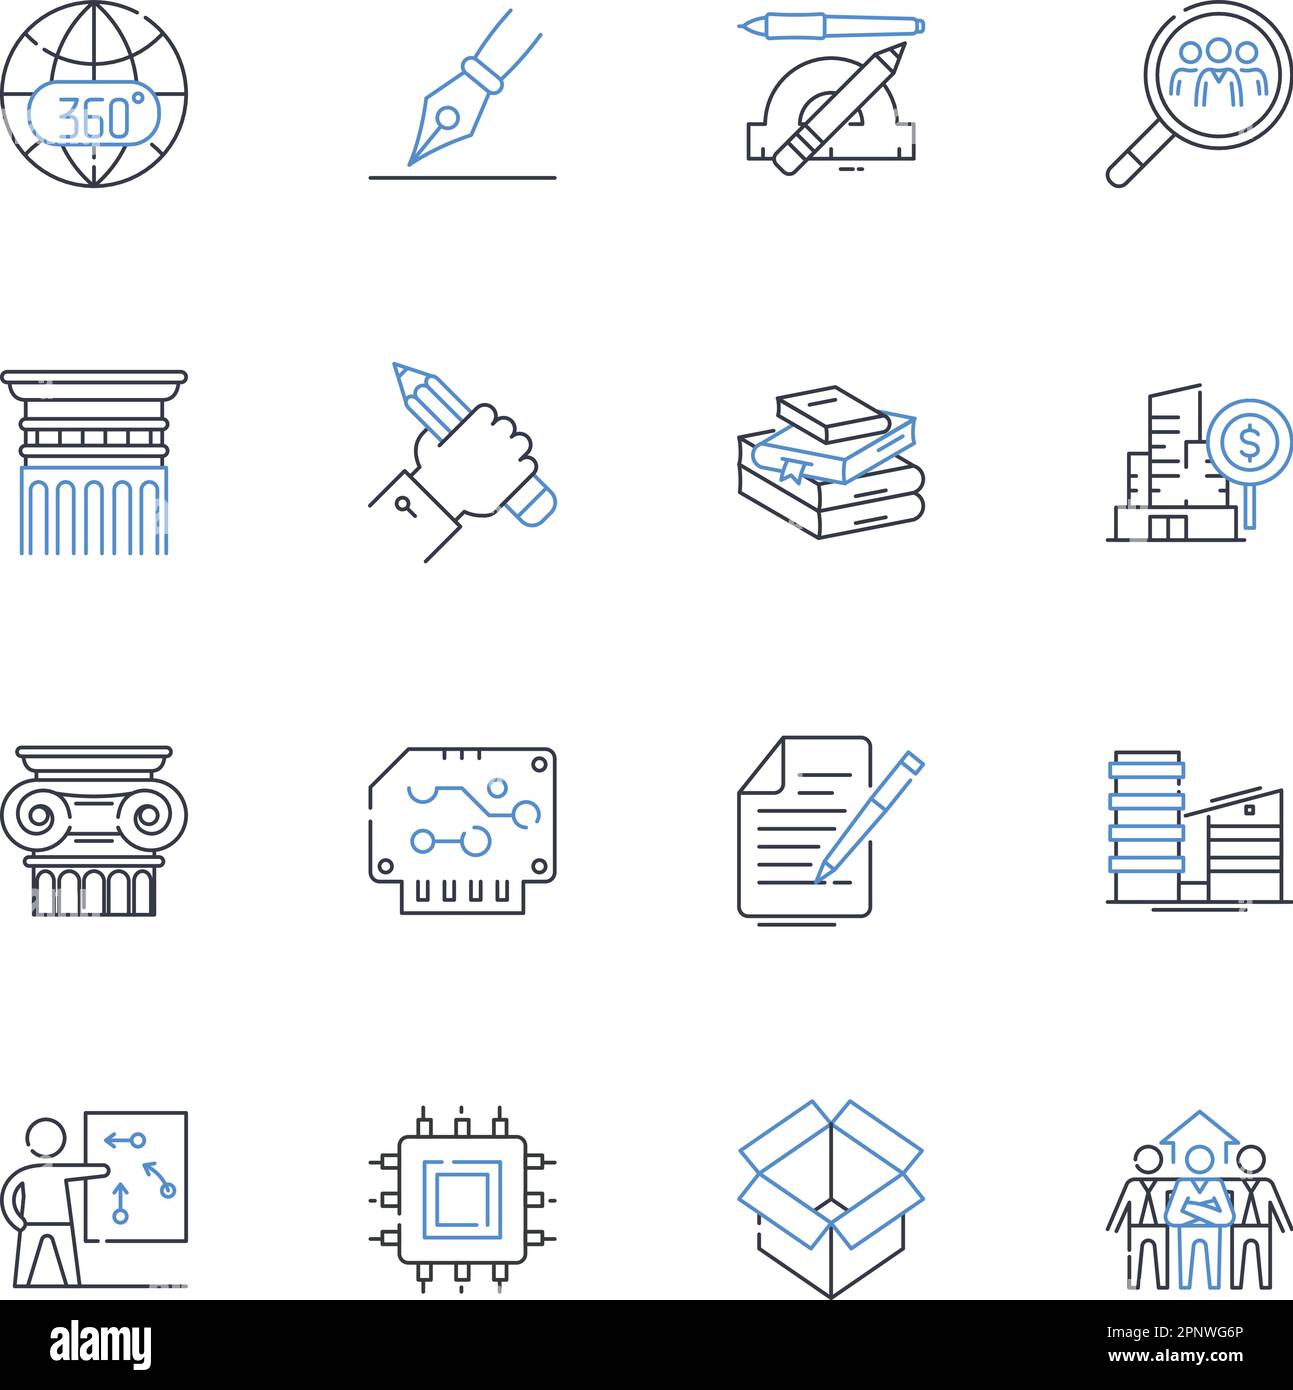 International affairs line icons collection. Diplomacy, Conflict, Cooperation, Negotiation, Diplomats, Treaties, Globalization vector and linear Stock Vector